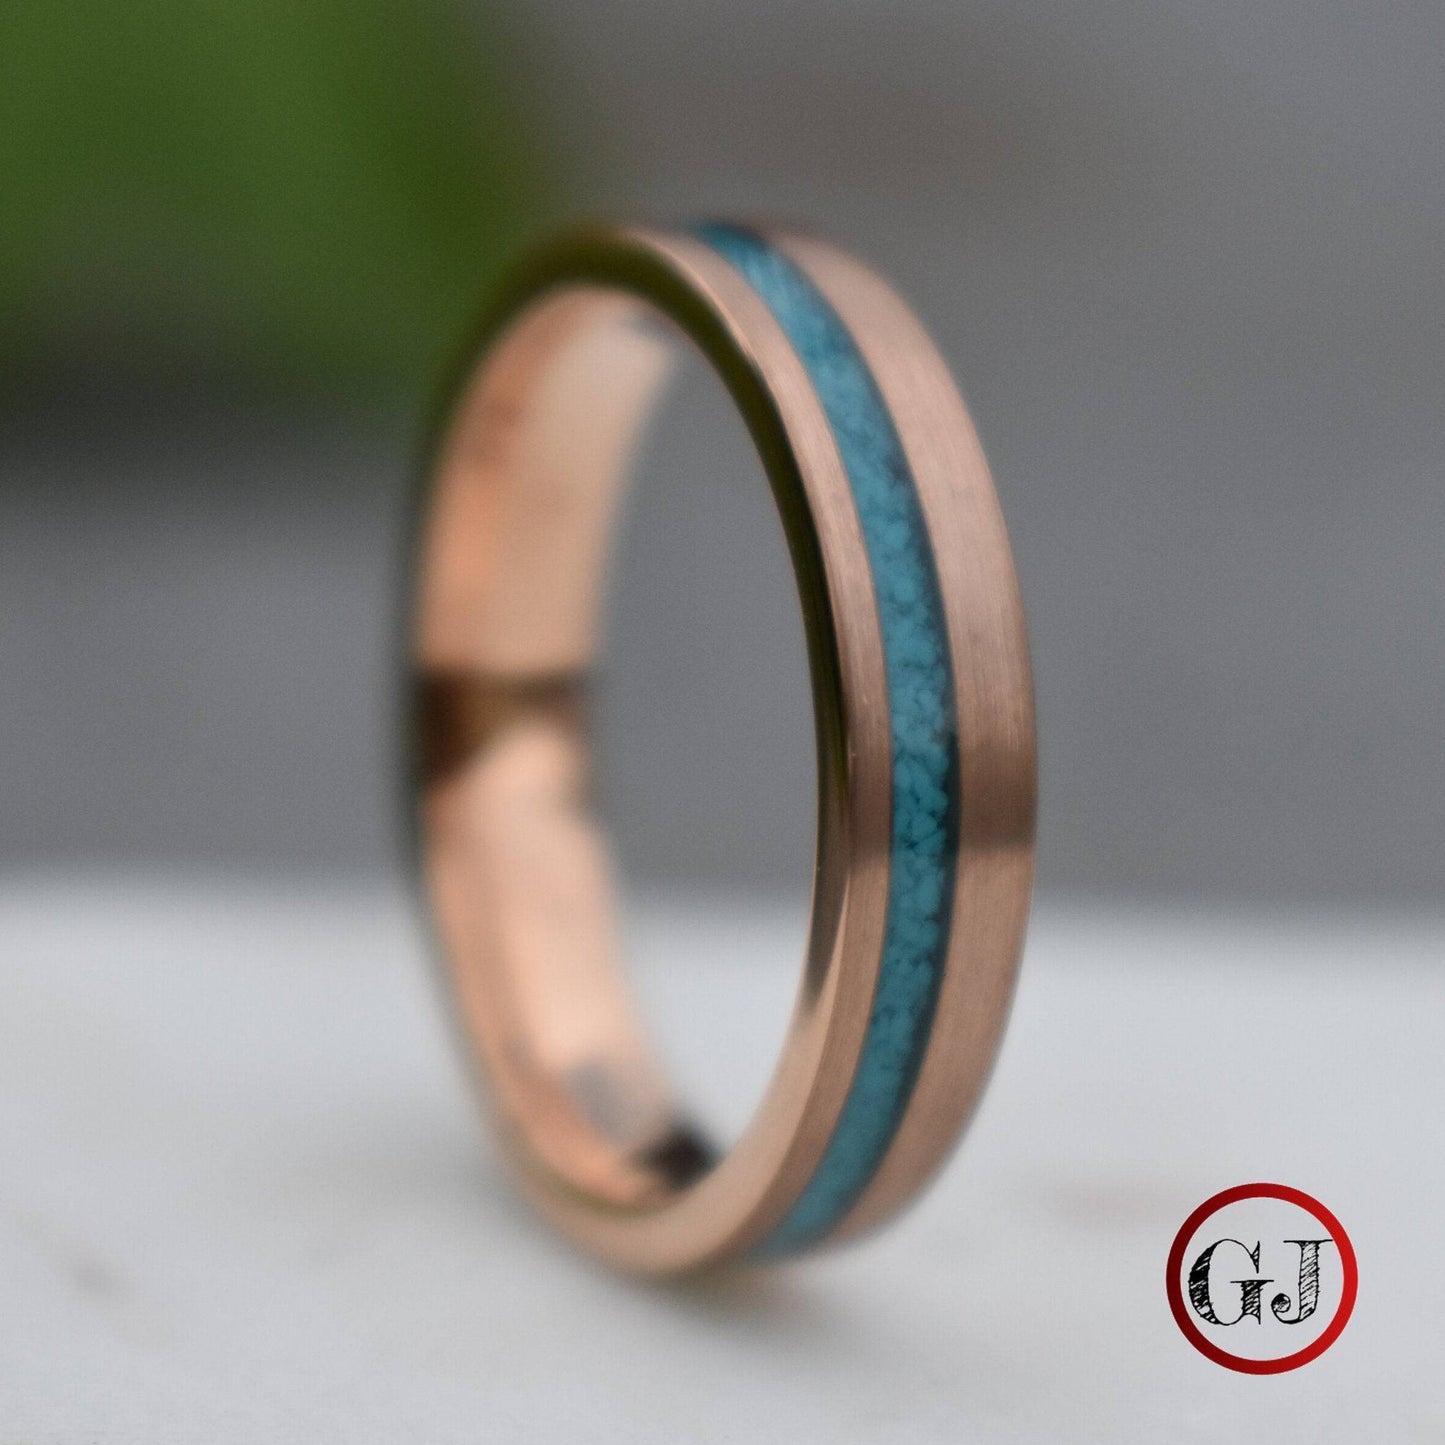 Tungsten 5mm Ring Rose Gold with Crushed Turquoise Wedding Band - Tungsten Titans